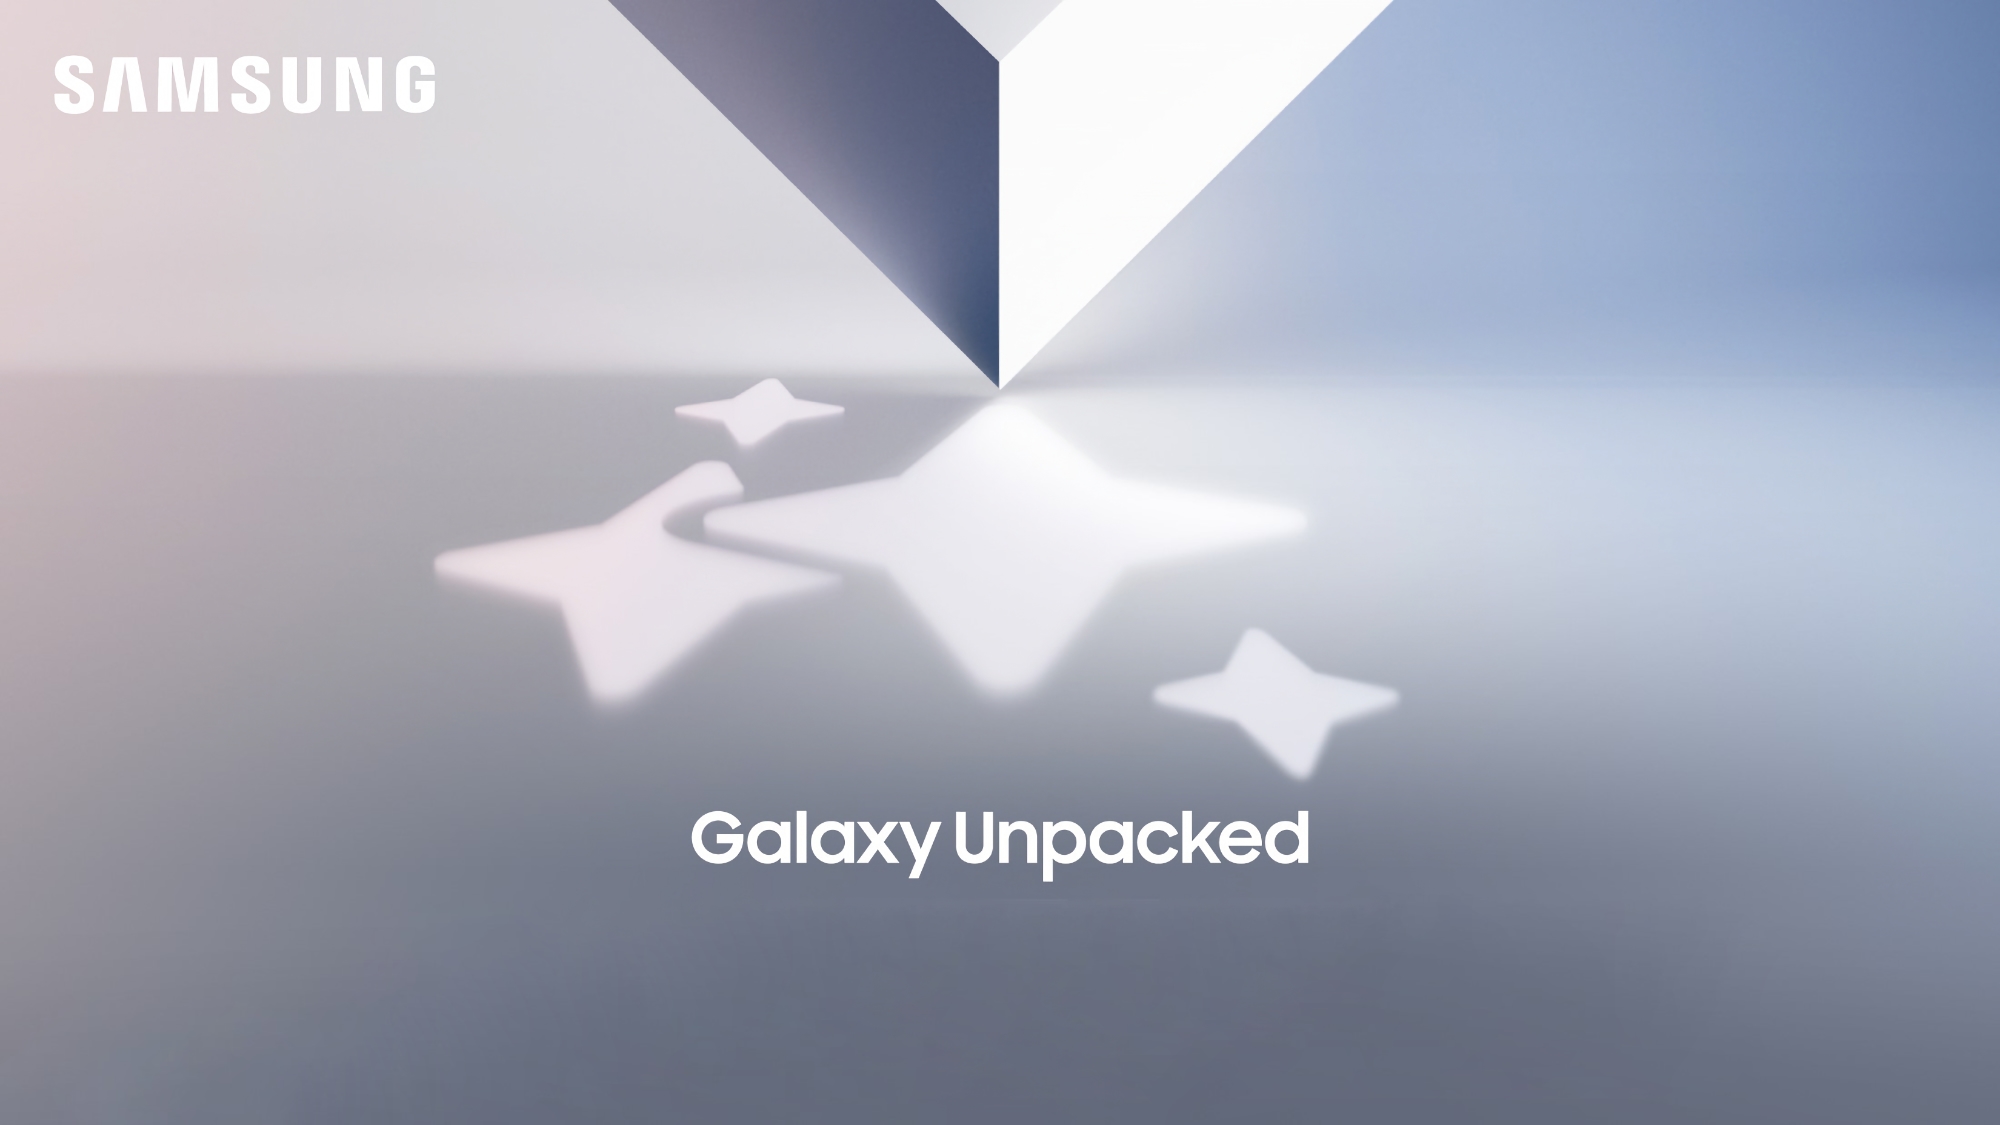 Where and when to watch Samsung's Galaxy Unpacked presentation, which will showcase the Galaxy Fold 6 and Galaxy Flip 6 foldable smartphones